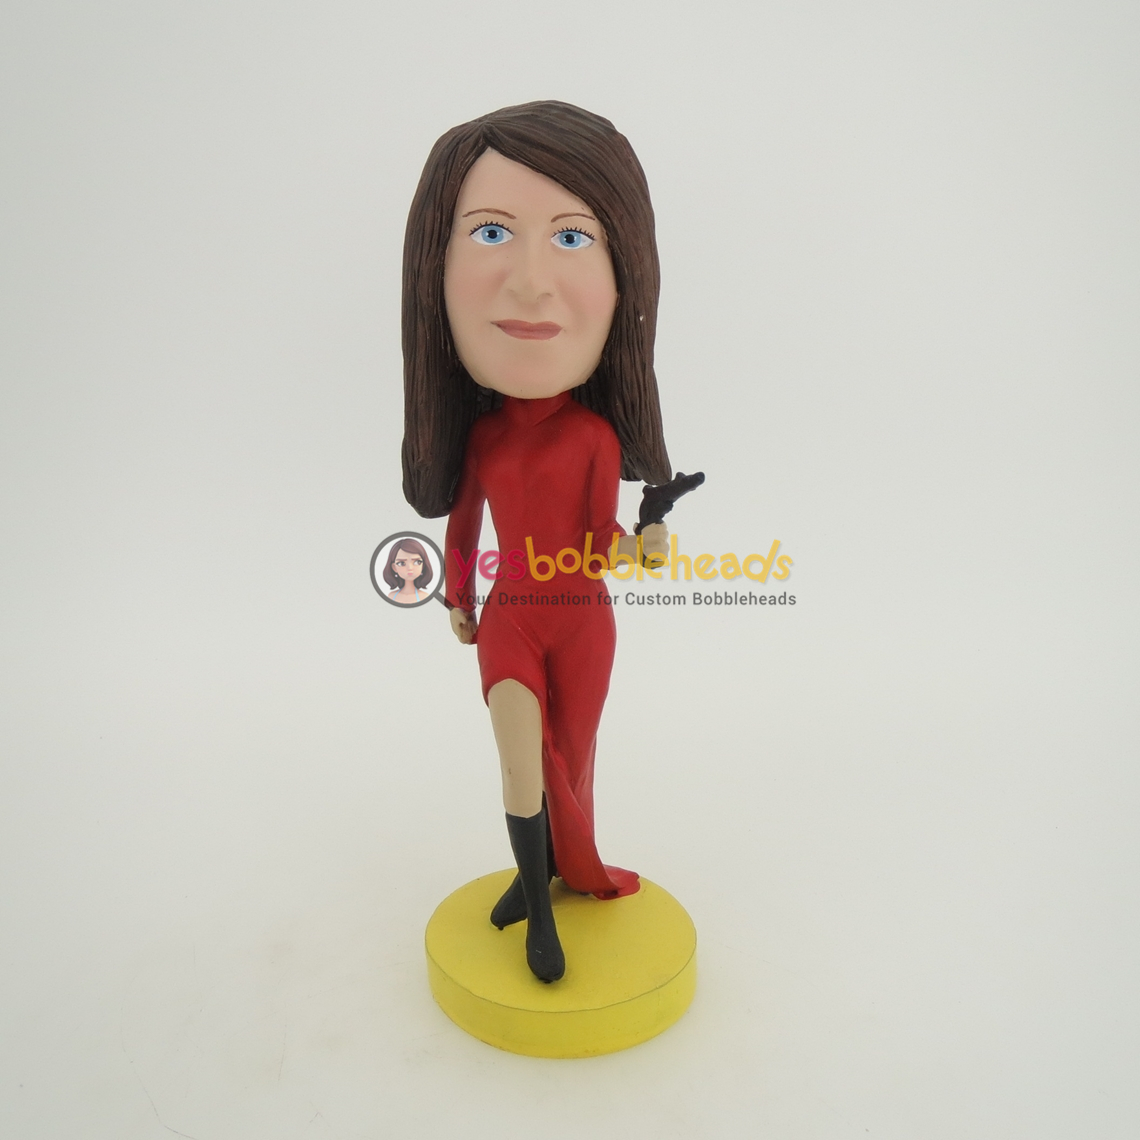 Picture of Custom Bobblehead Doll: Woman with Handgun